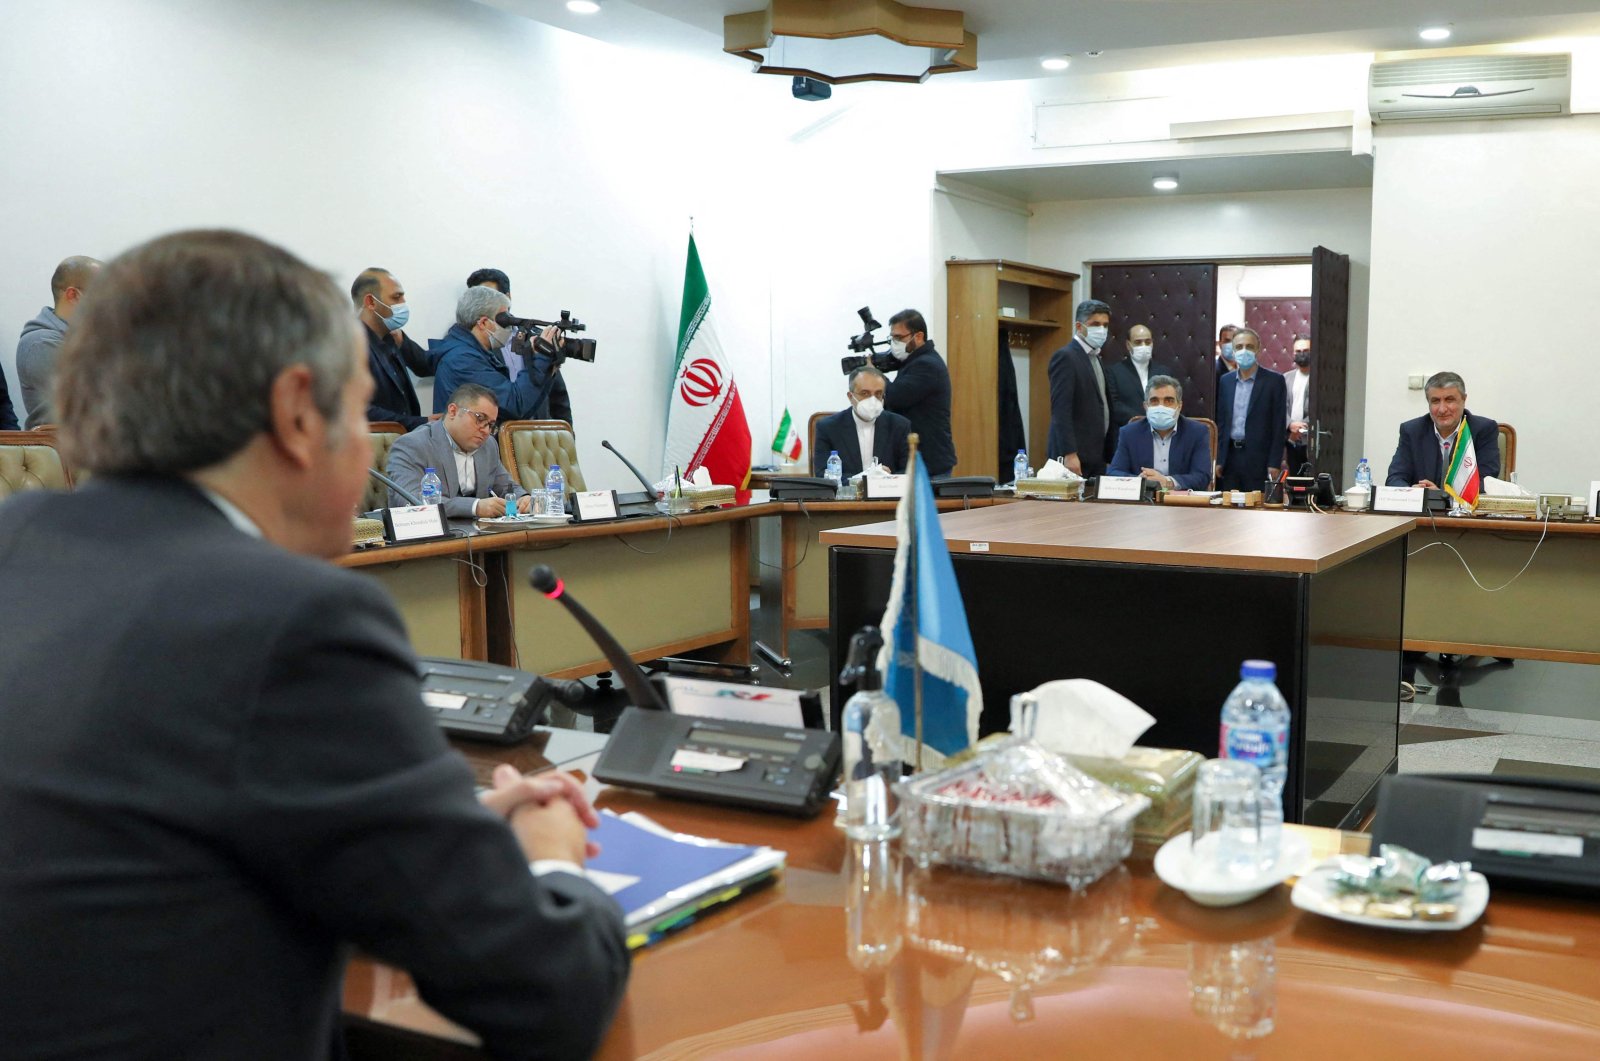 The Director General of the International Atomic Energy Agency Rafael Grossi (L) meets with the Head of Iran&#039;s Atomic Energy Organization Mohammad Eslami (R) during a press conference in the capital Tehran in the capital Tehran on Nov. 23, 2021. (Photo by Atomic Energy Organization of Iran / AFP)